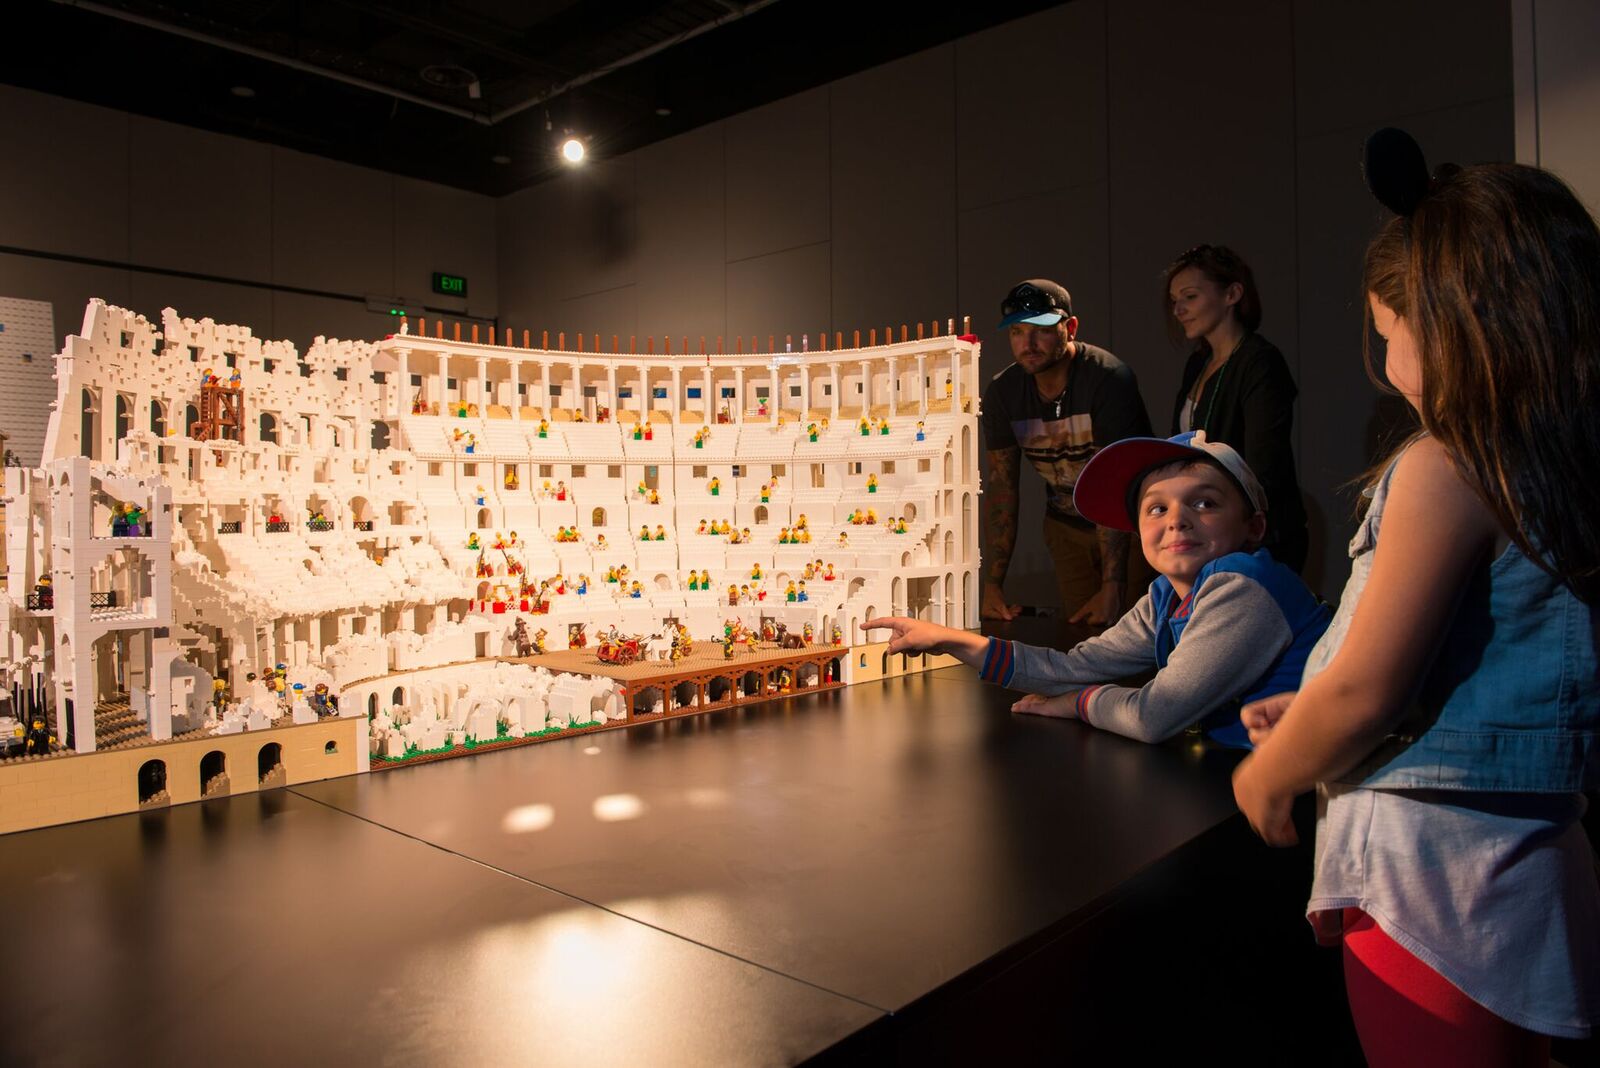 Calling all LEGO fans! See epic exhibition ‘Brickman Experience’ in Canberra these school holidays